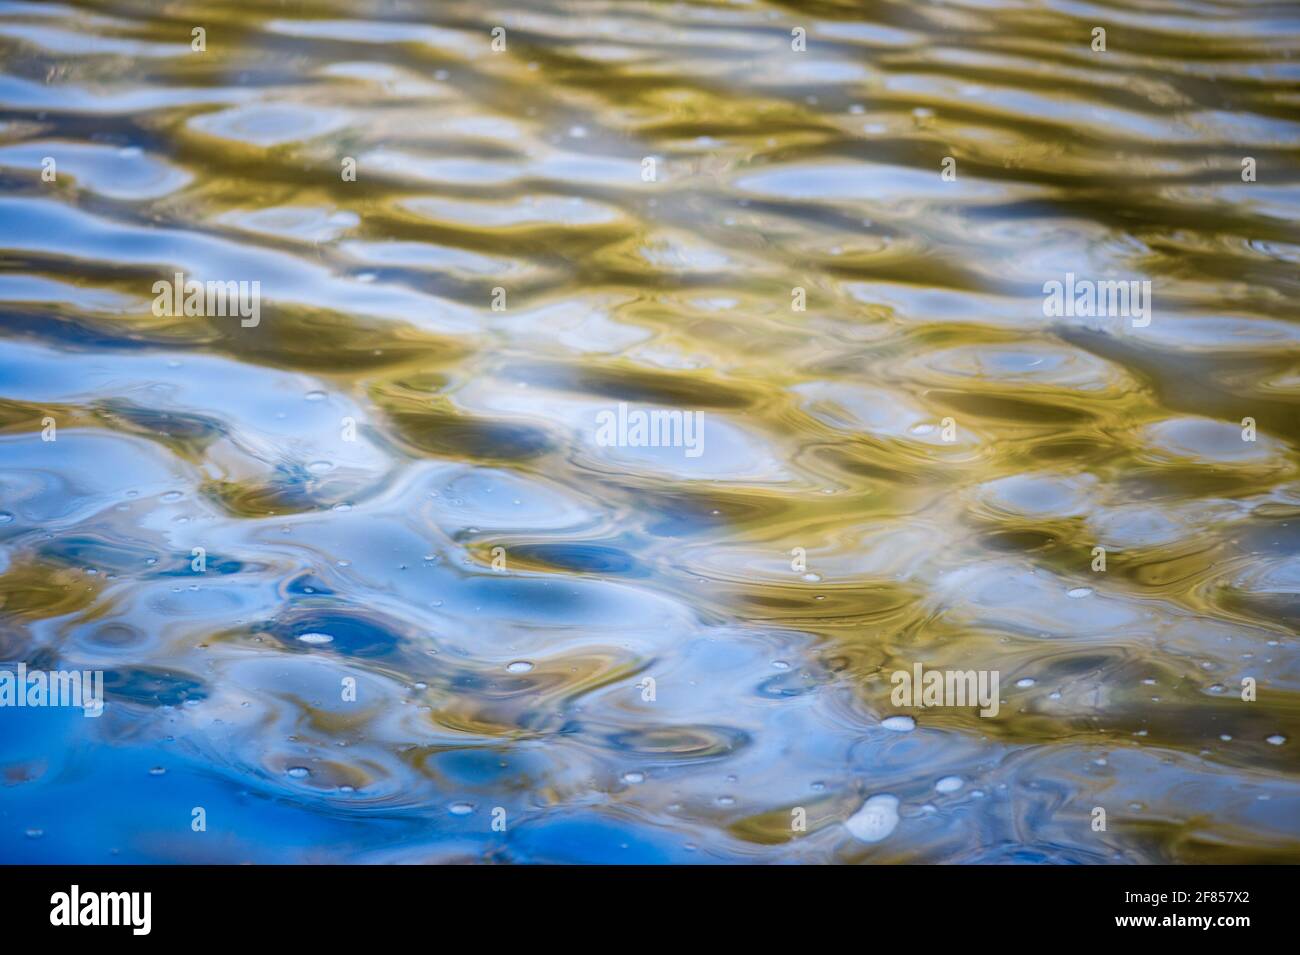 Abstract closeup image of water ripples and reflections in a gently flowing river on a hazy, breezy sunny day. Stock Photo